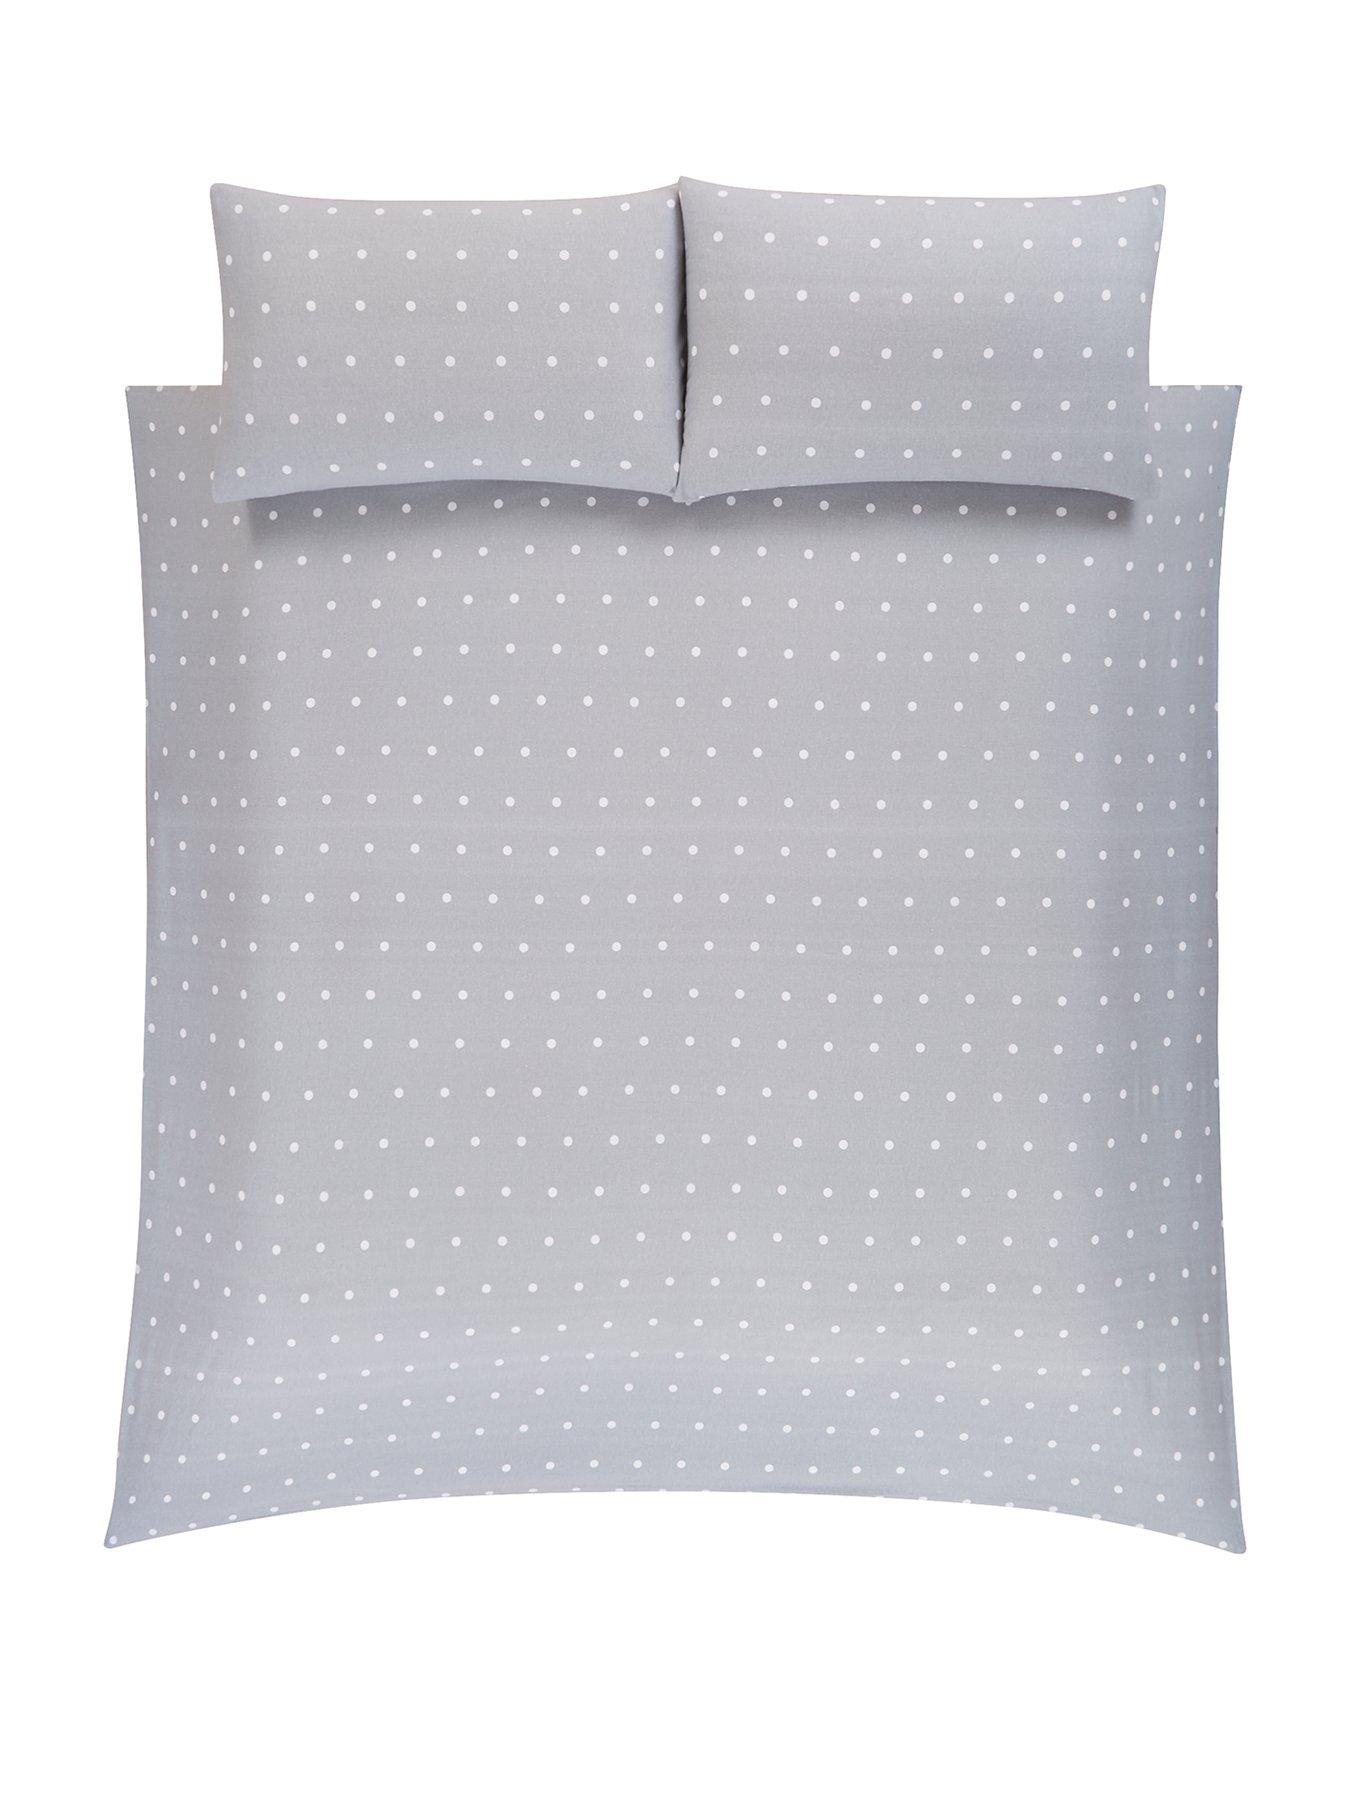 Everyday Collection Brushed Cotton Printed Spot Duvet Cover Set